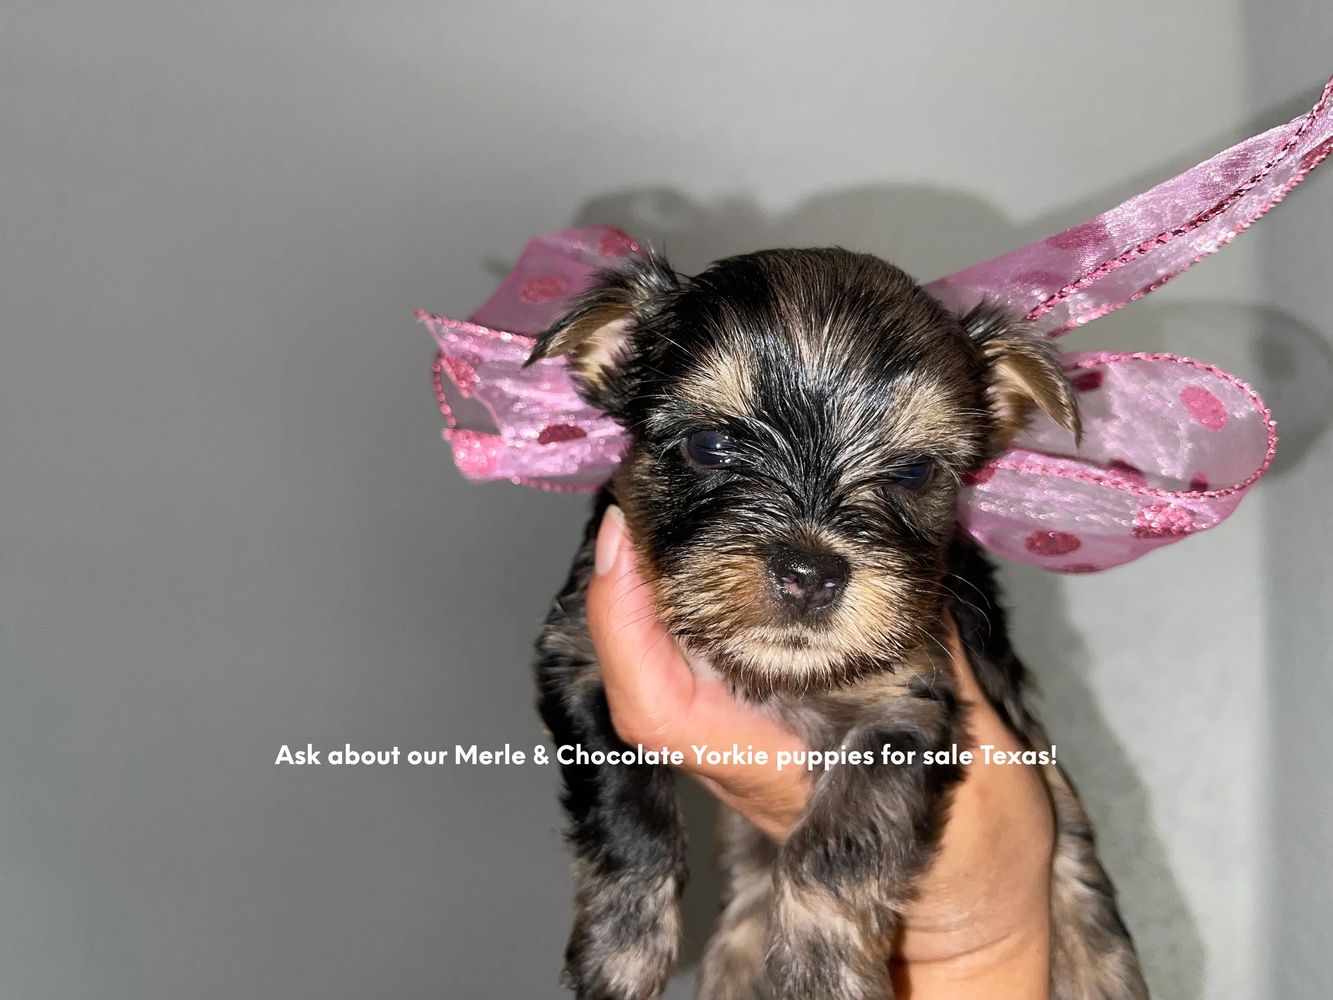 Ask about our Merle Yorkie puppies for sale Texas